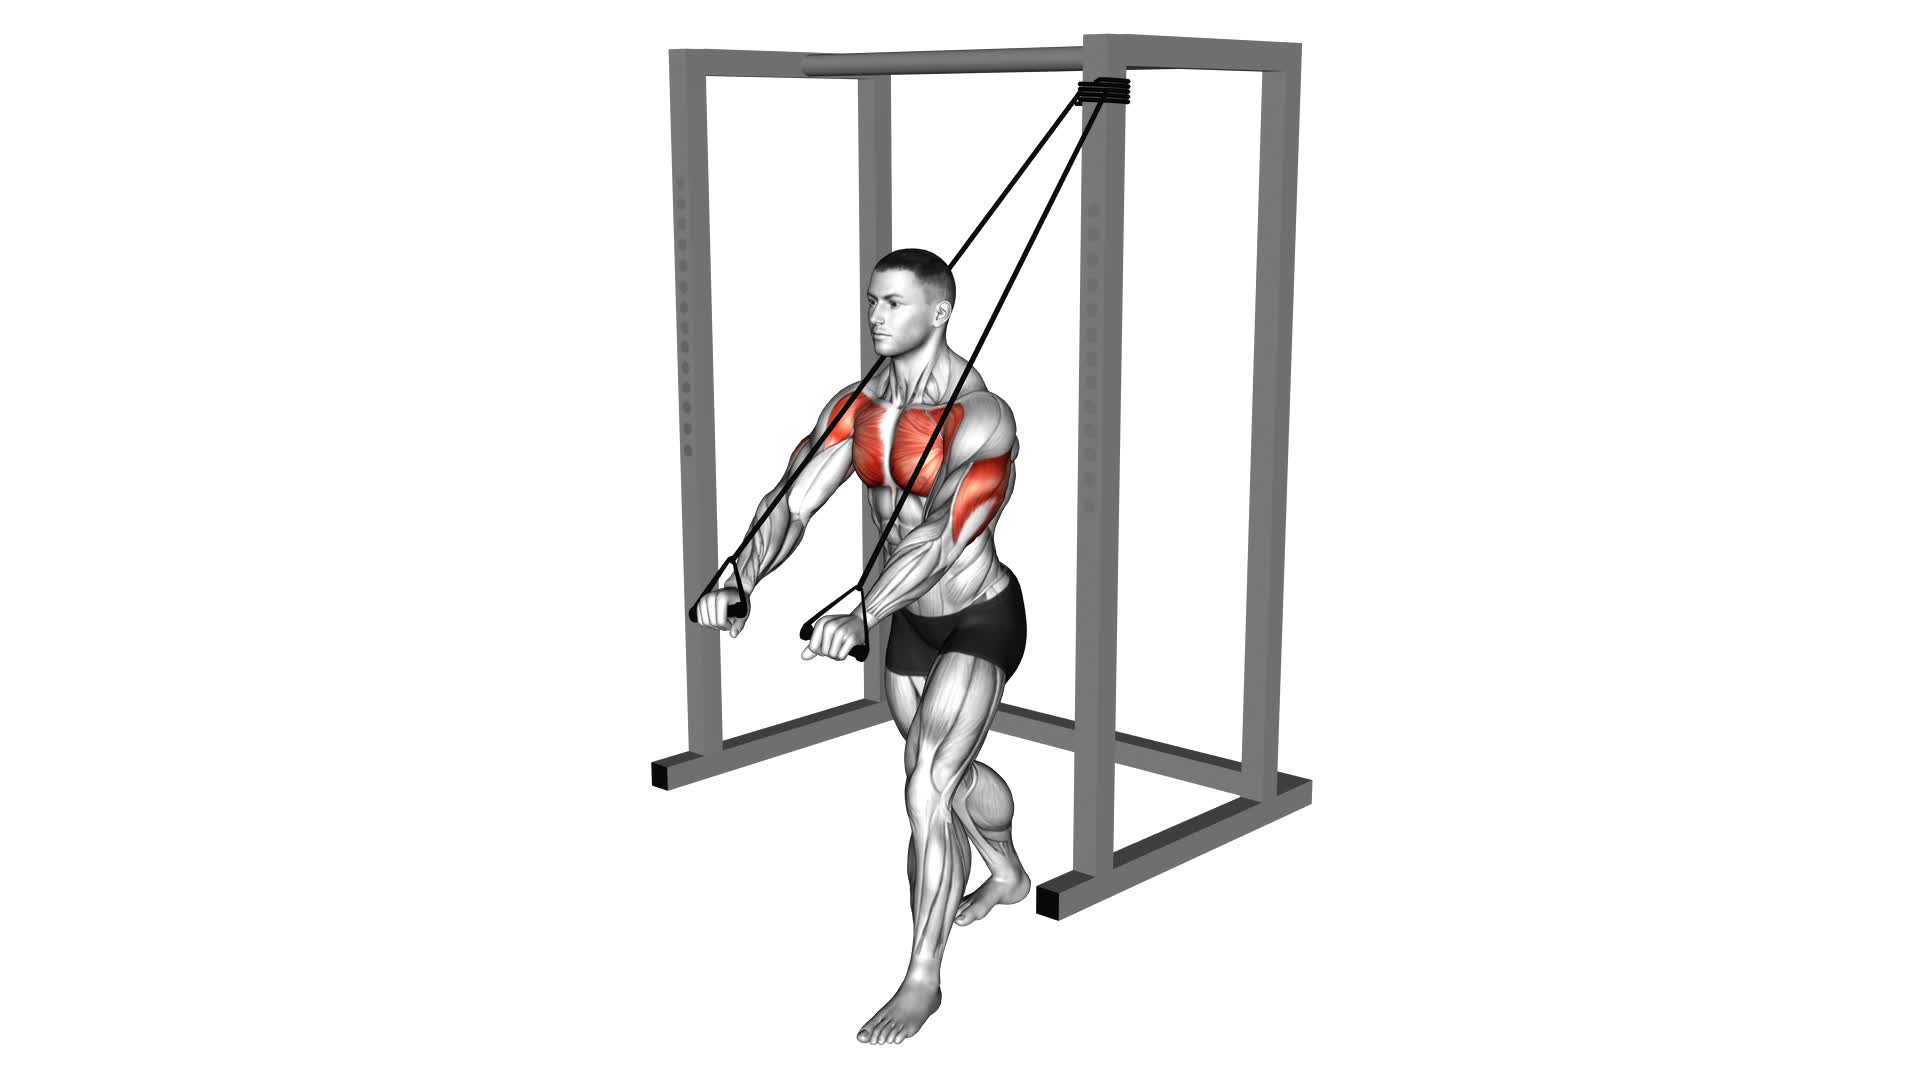 Band Low Chest Press (male) - Video Exercise Guide & Tips